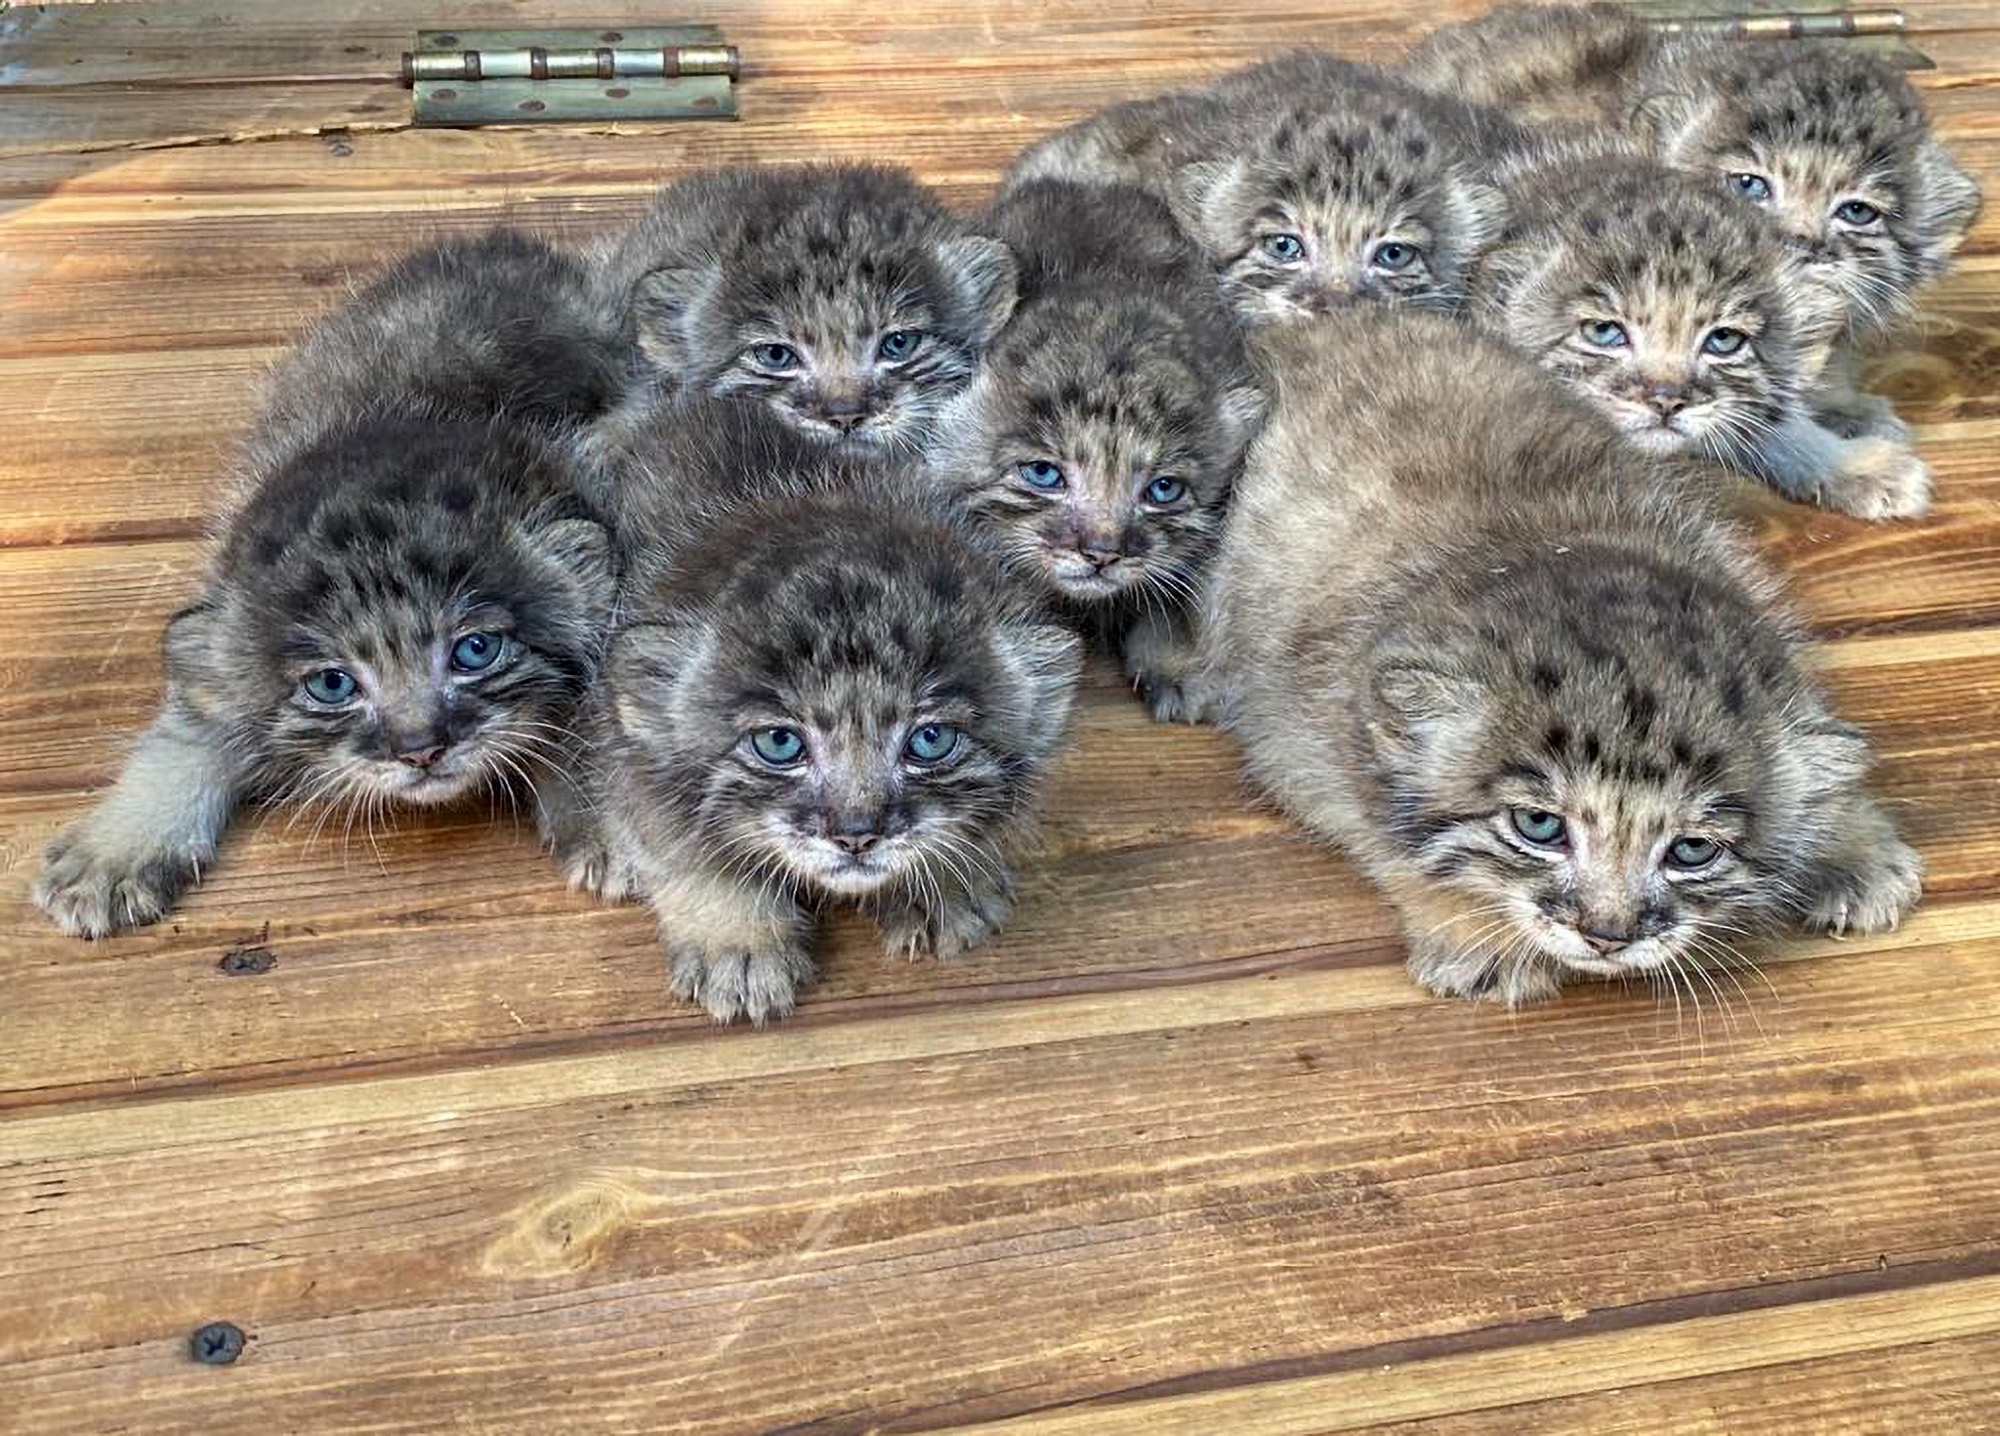 a total of 16 adorable wild kittens with large, bright blue eyes were born ...